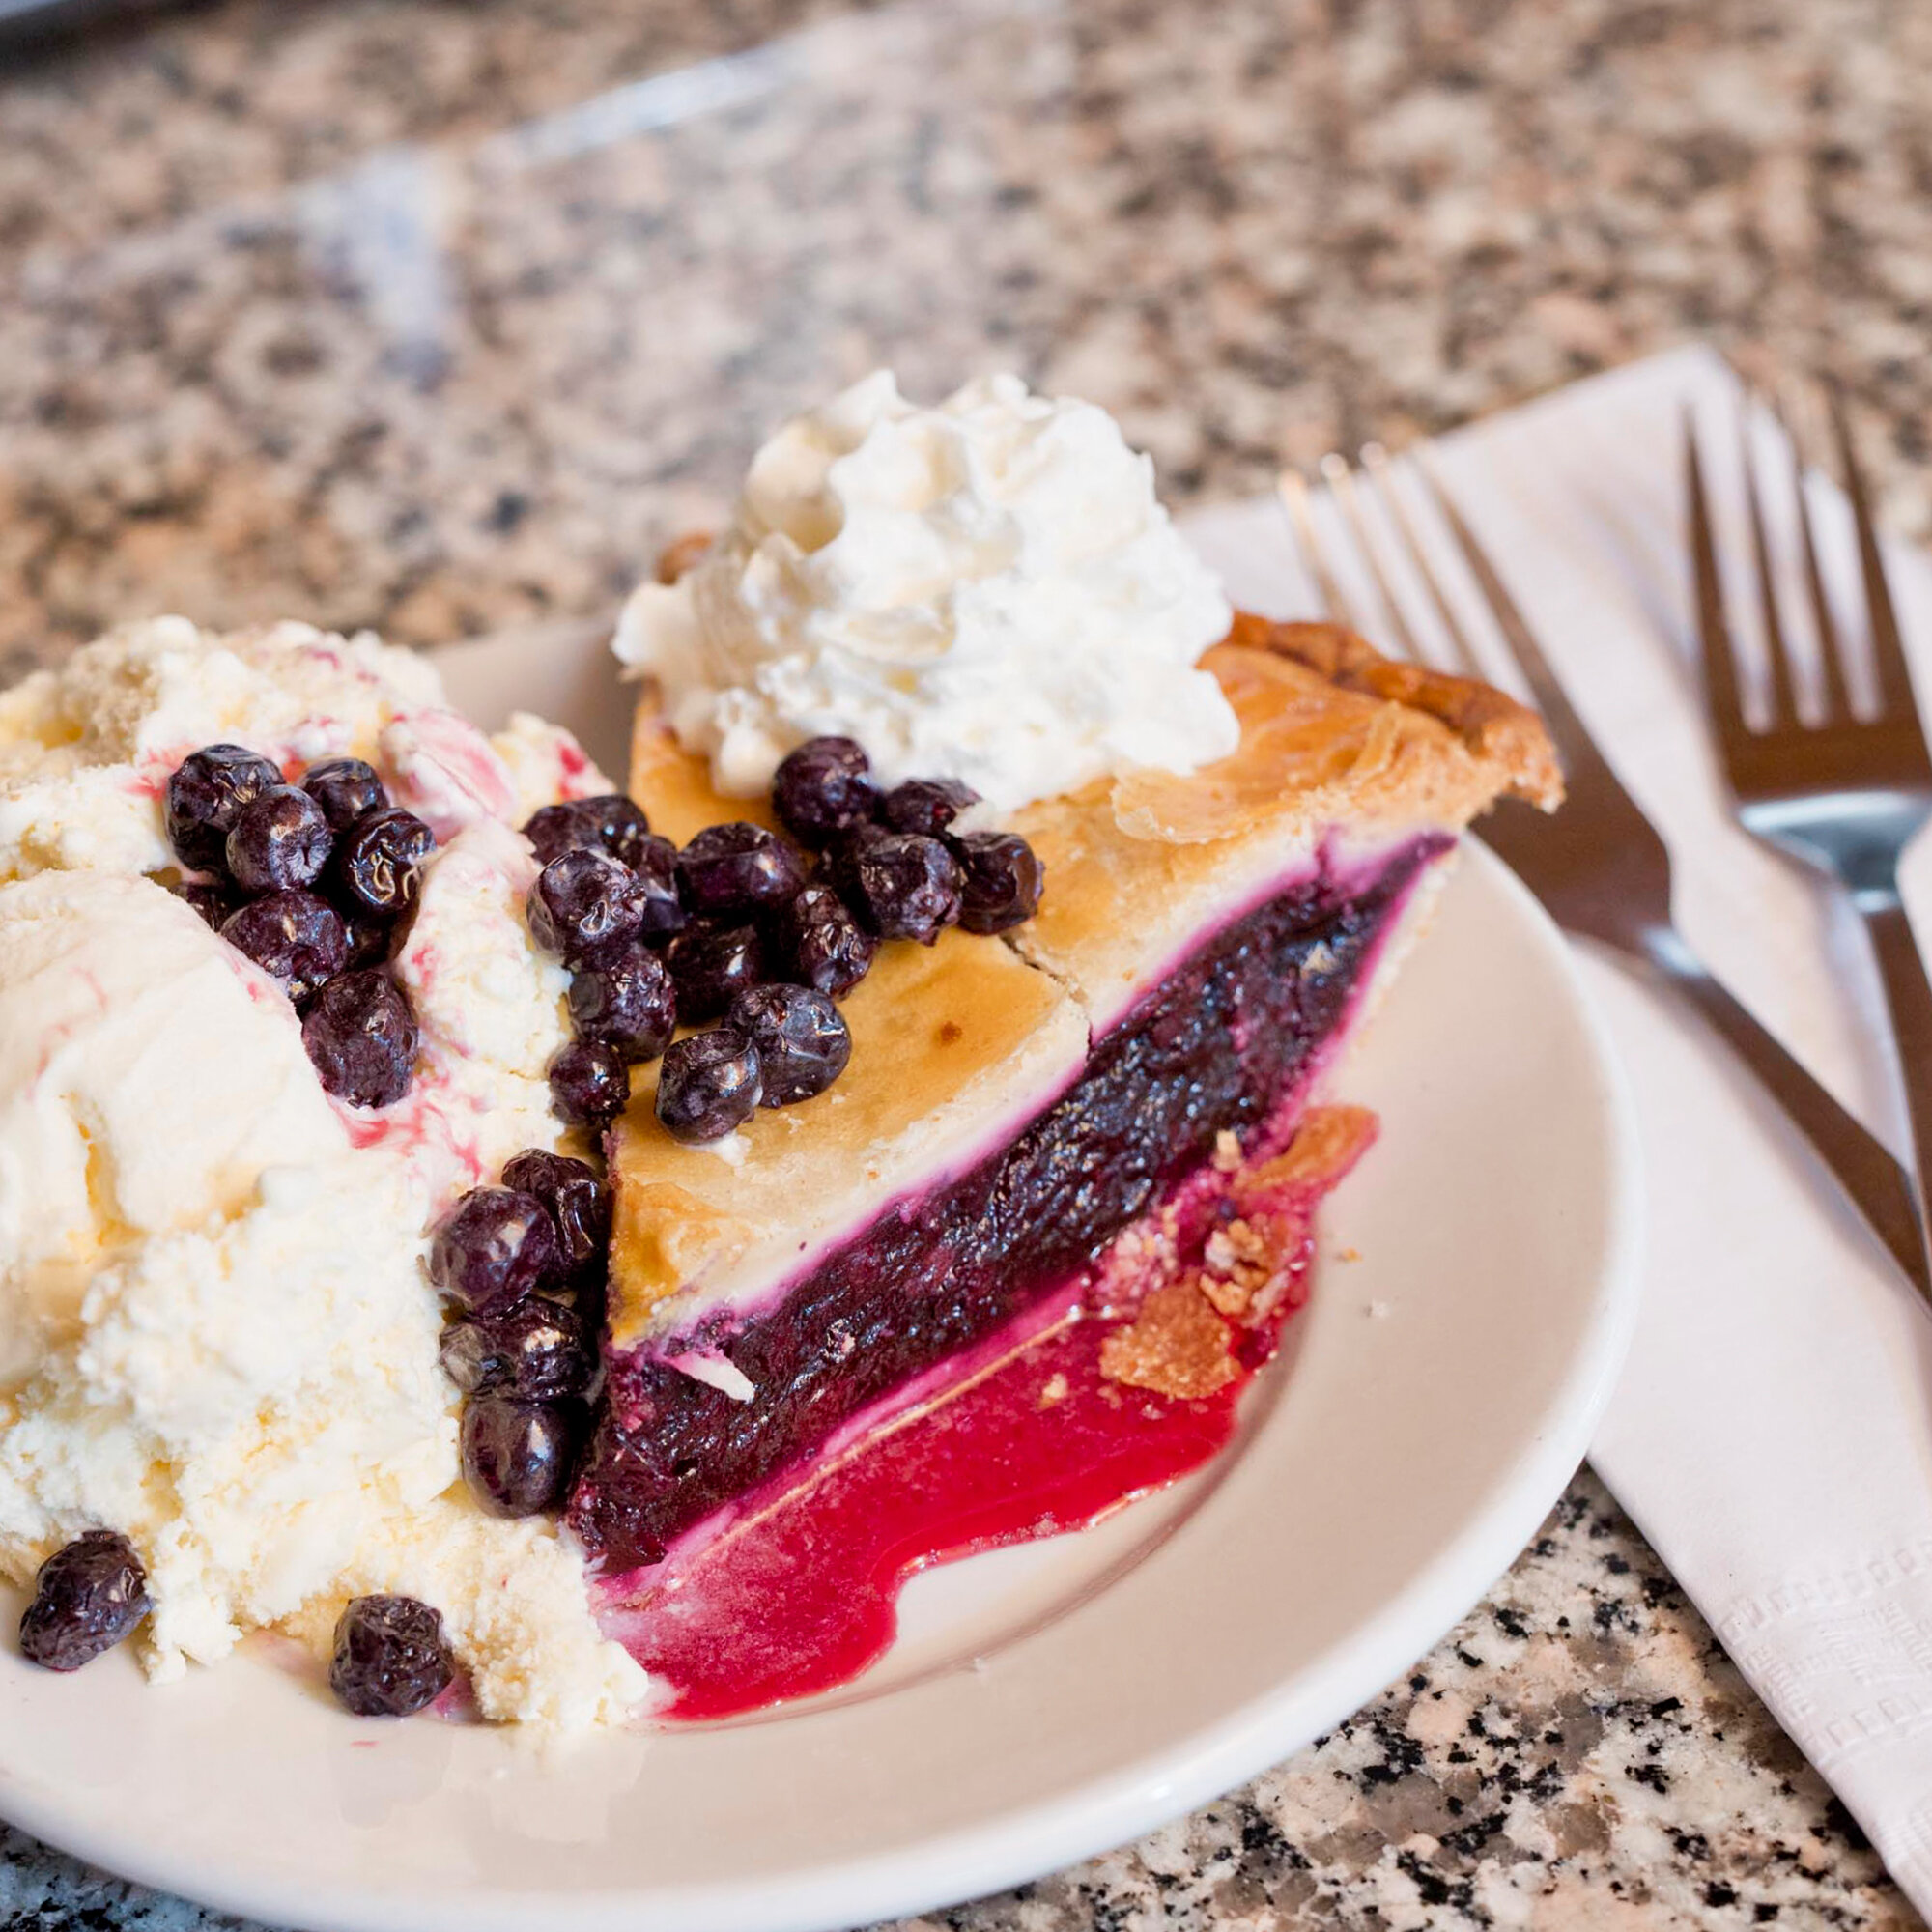  juicy slice of blueberry pie with a heaping side of vanilla ice cream, topped with fresh whipped cream 